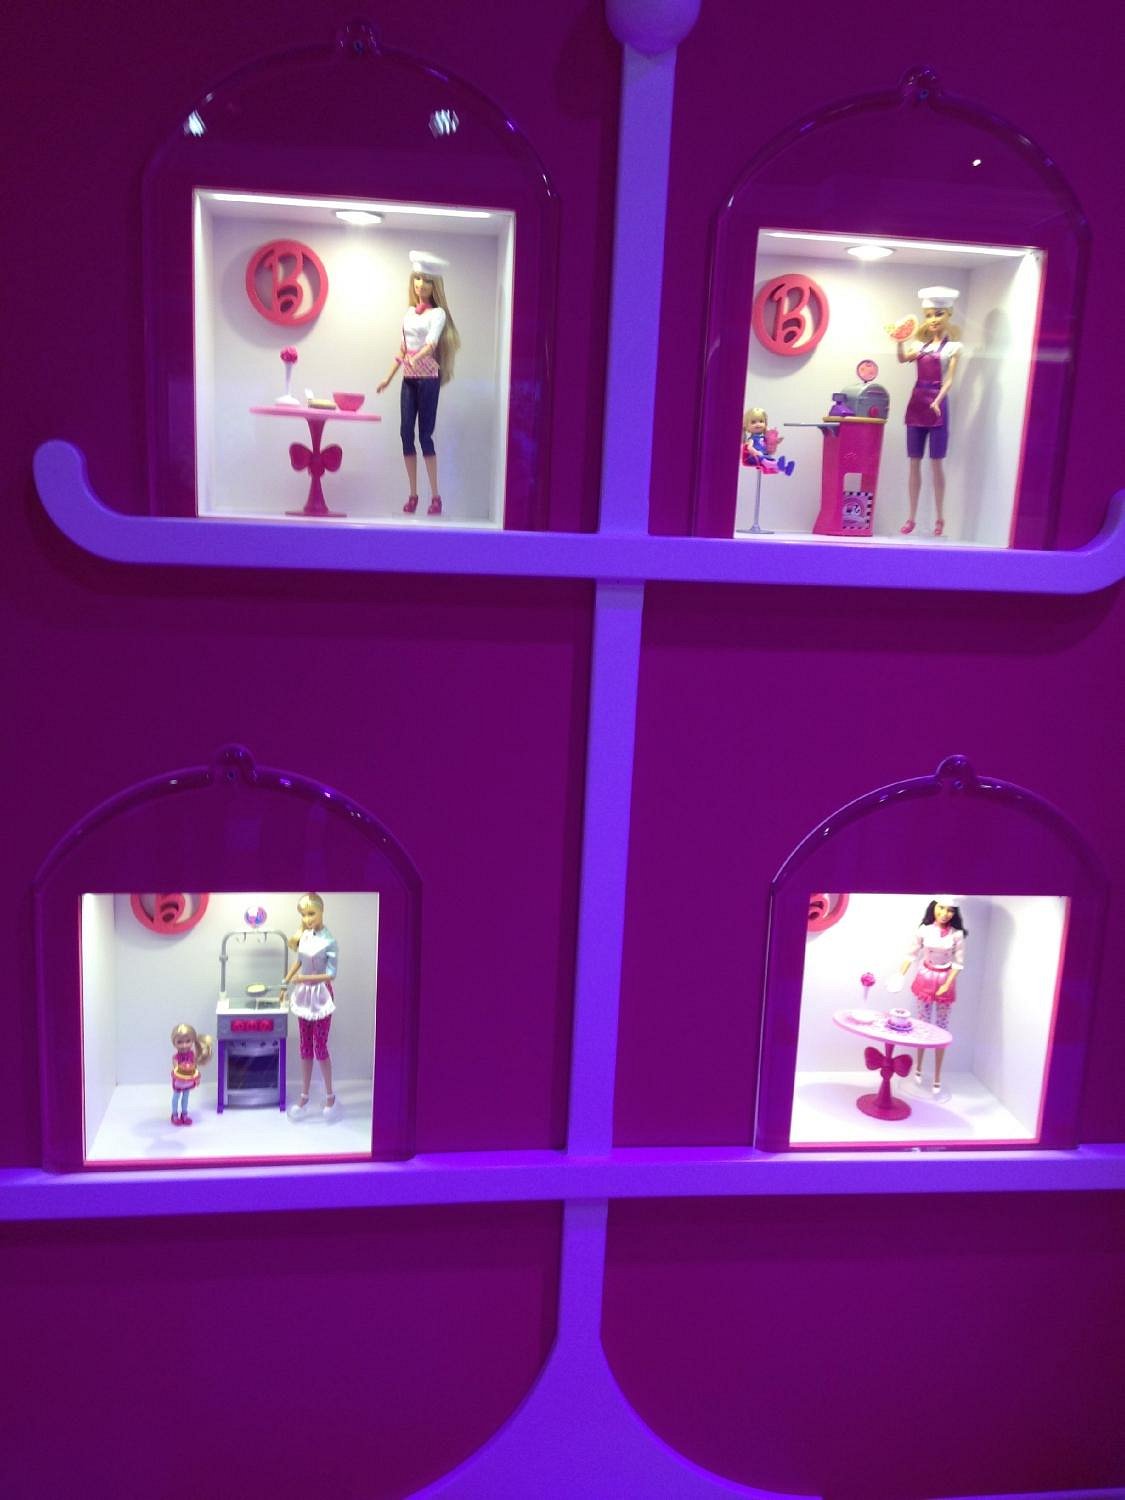 And here's Barbie's dream house from the movie vs. the dream house you can  build IRL: in 2023